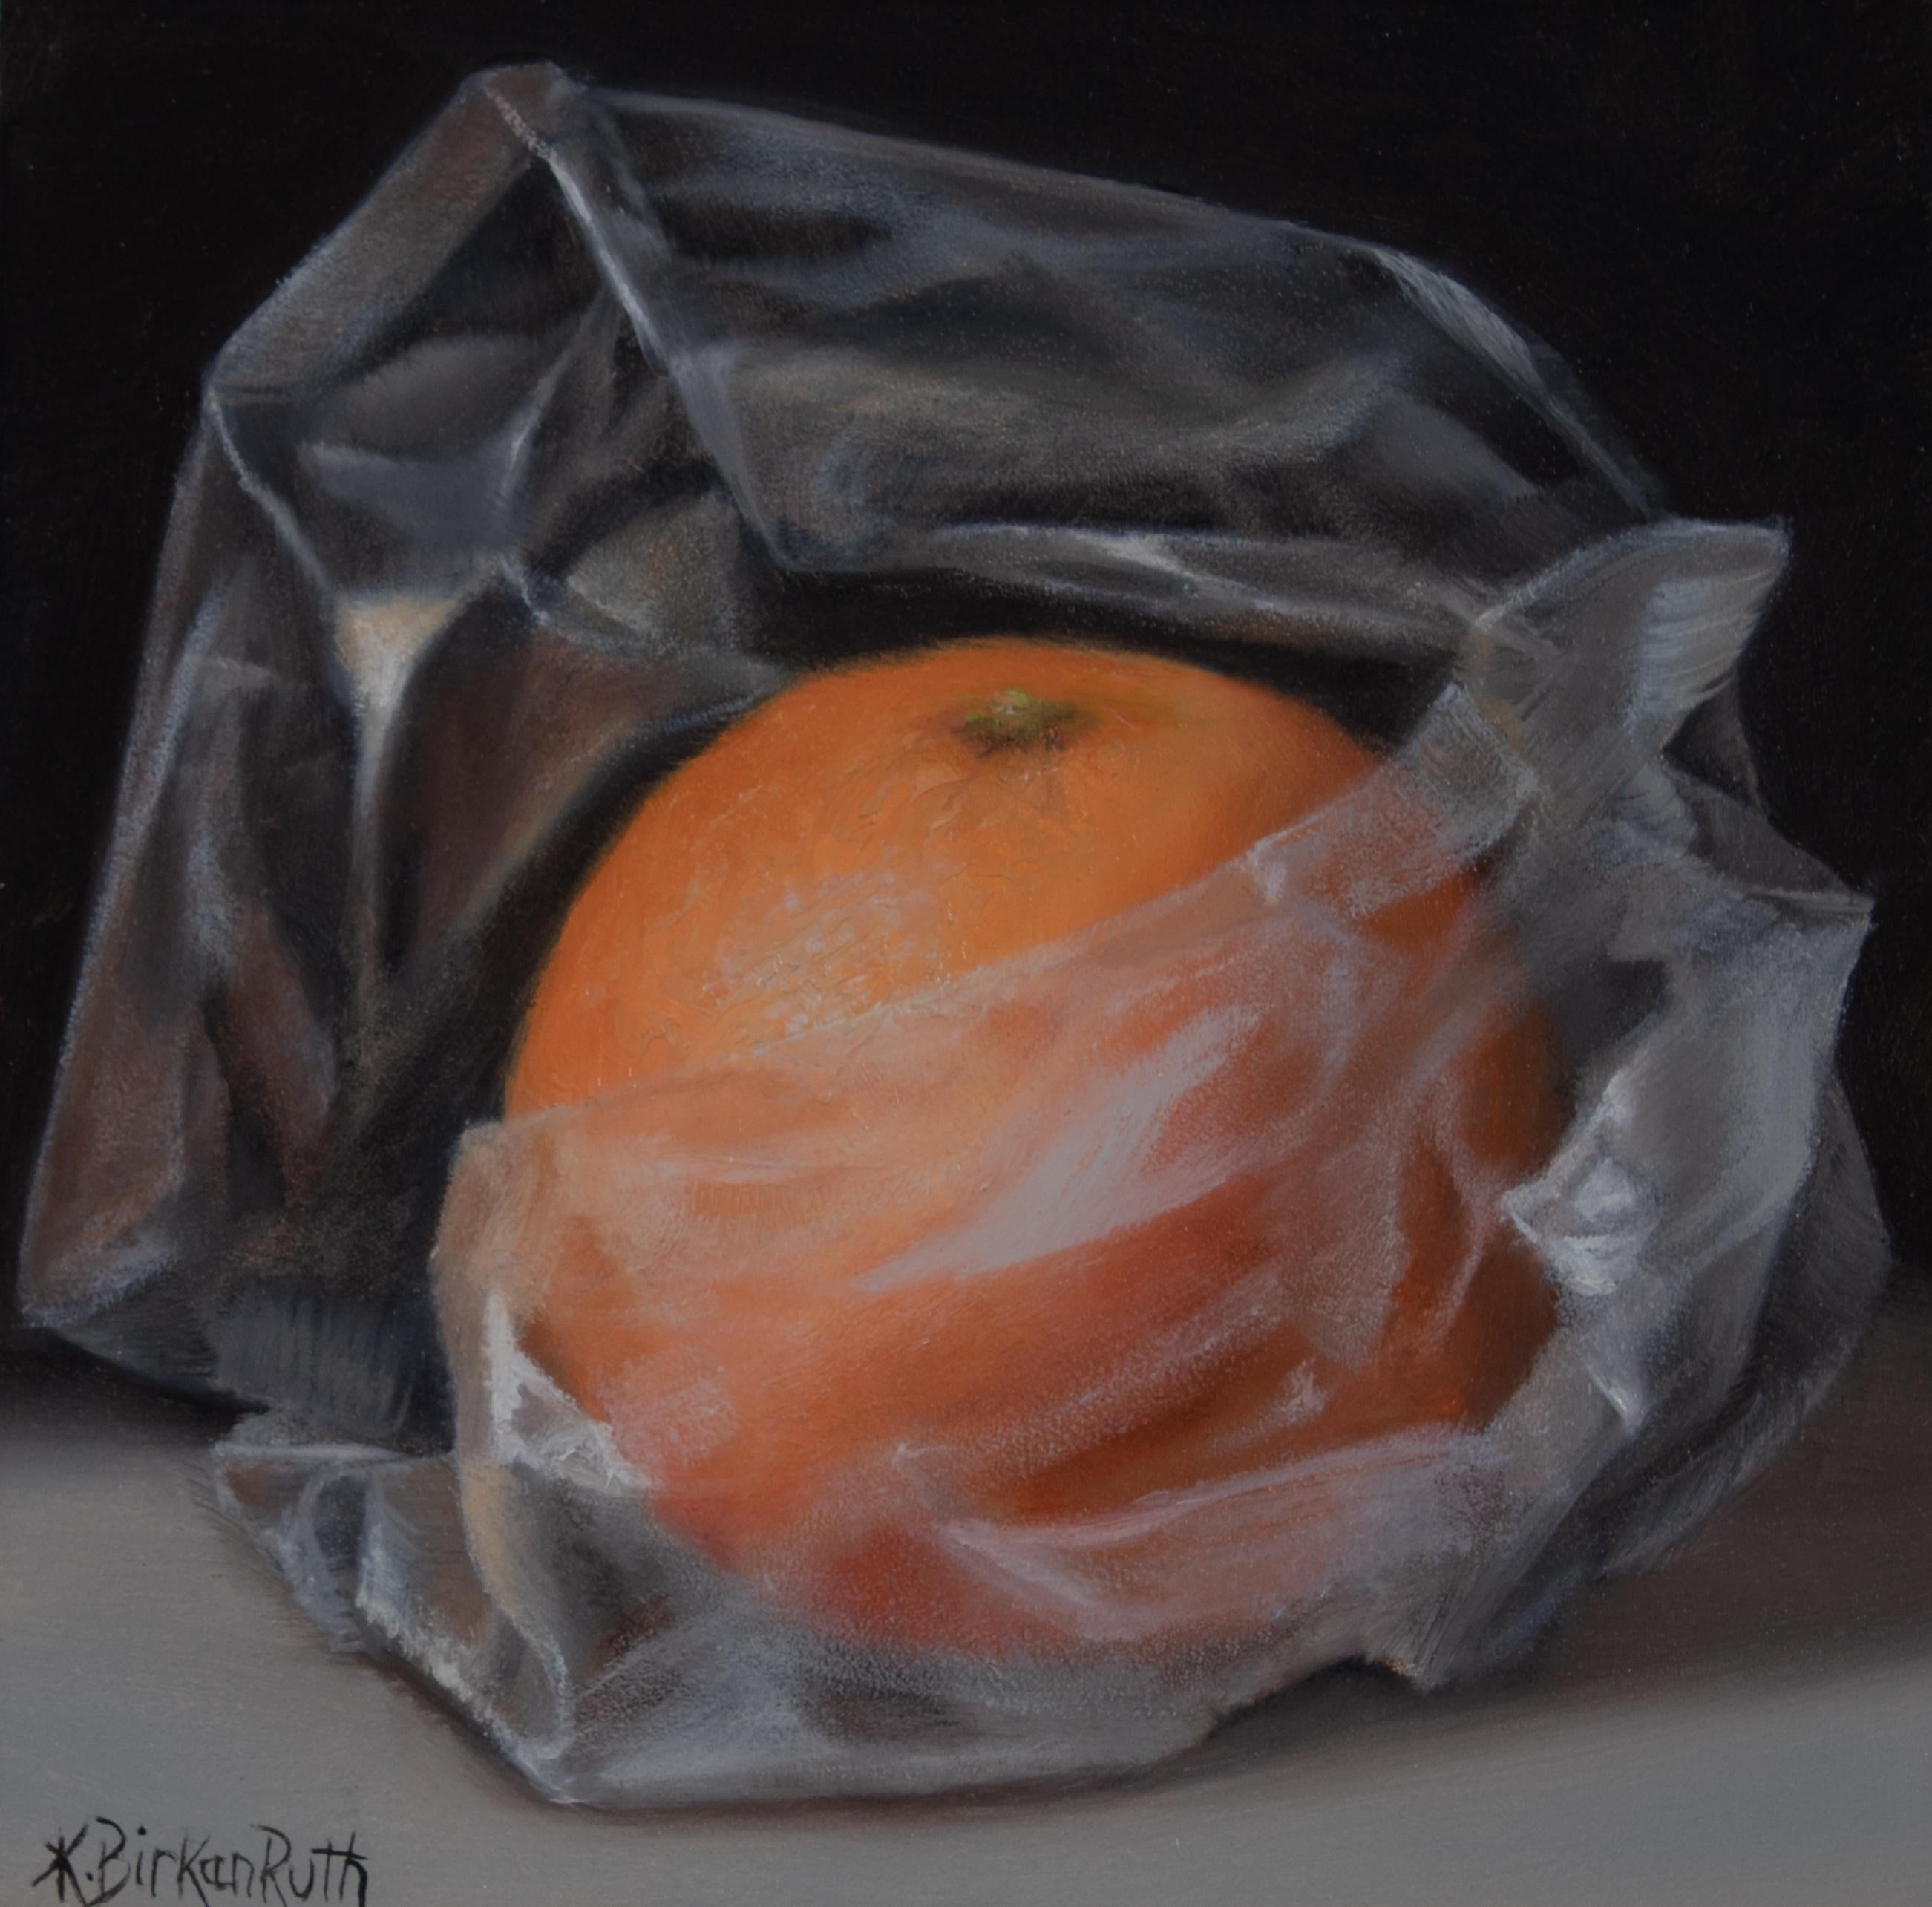 Kelly Birkenruth's "Orange Wrapped in Plastic" (2023) is an original oil painting on panel, measuring 5 x 5 x 1 inches. This captivating still life features an orange wrapped in a translucent plastic sheet, showcasing Birkenruth's exceptional